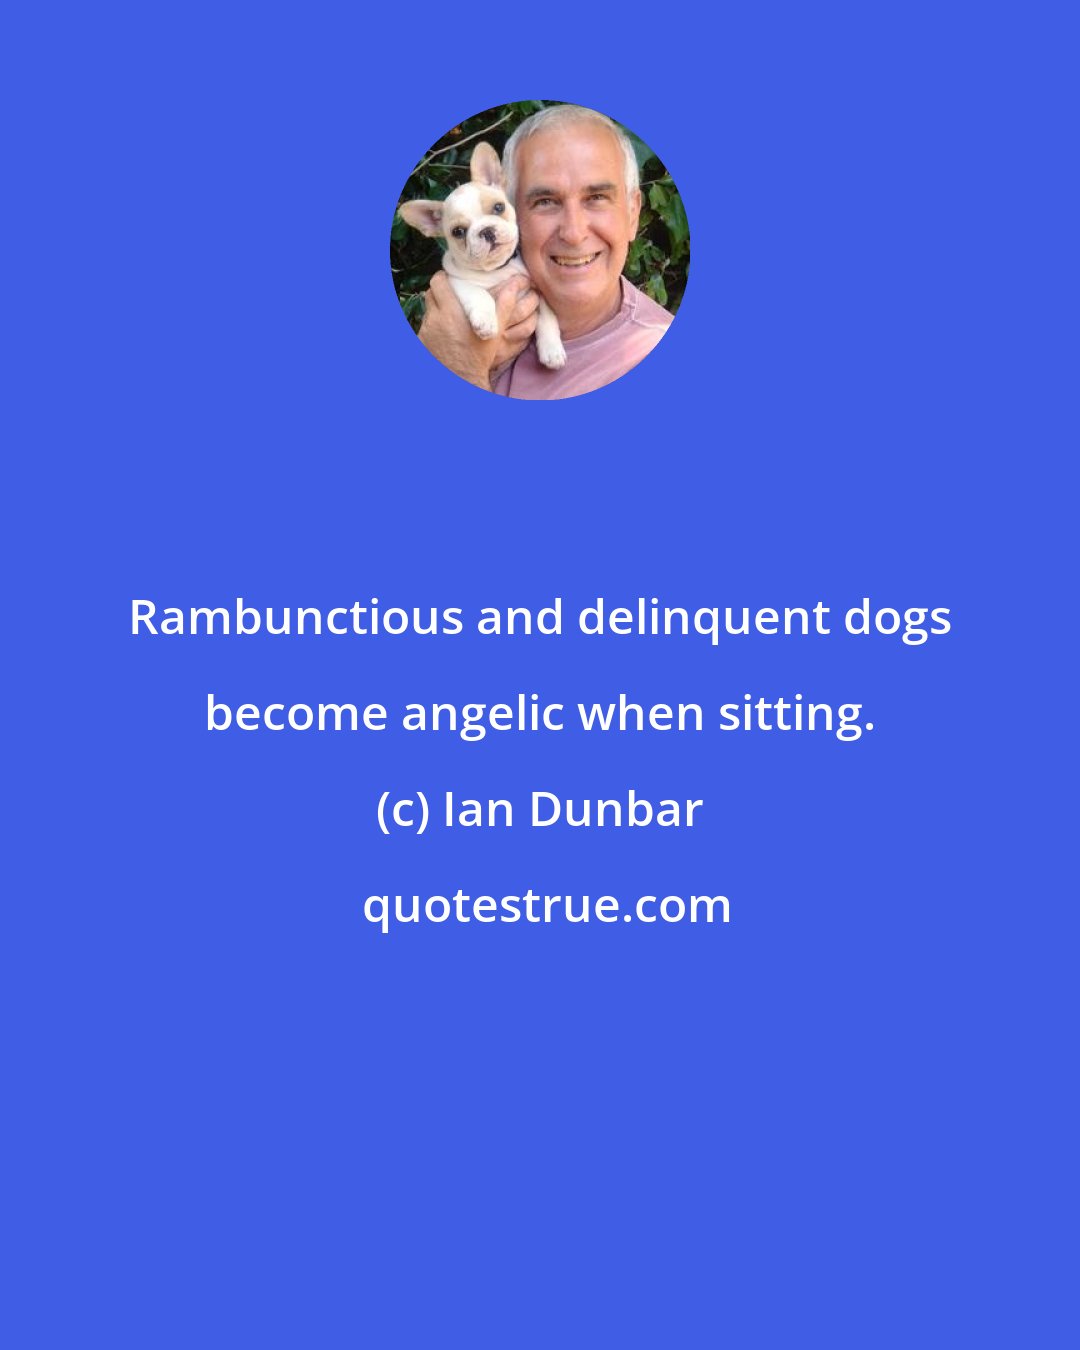 Ian Dunbar: Rambunctious and delinquent dogs become angelic when sitting.